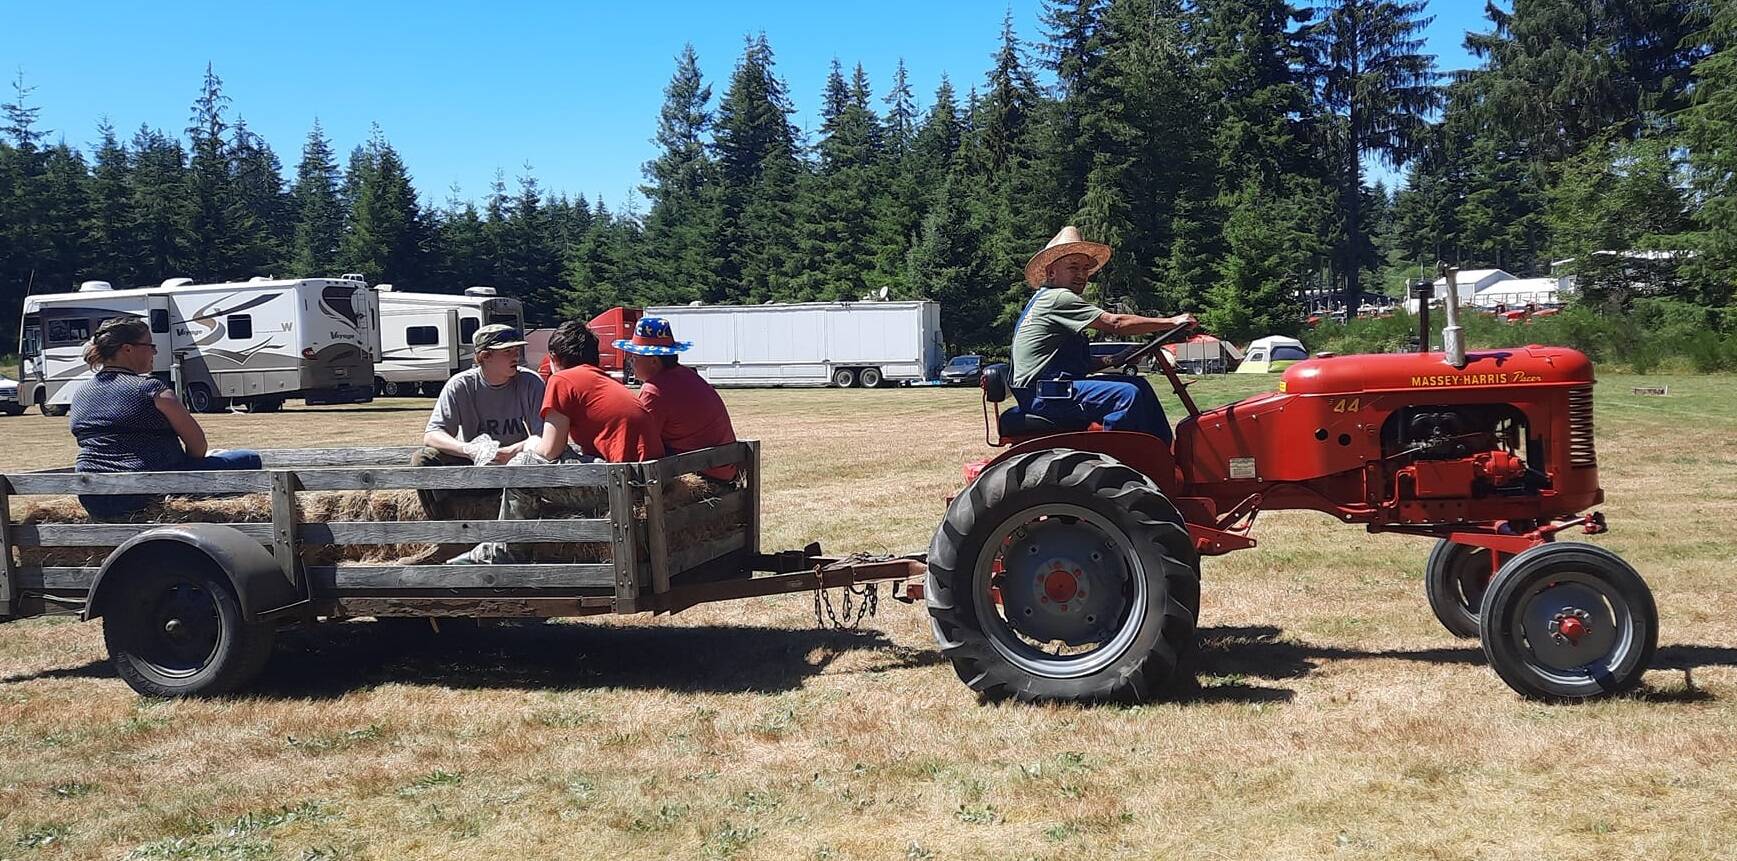 ‘Farmer’ Moe offered up hay rides with his tractor.